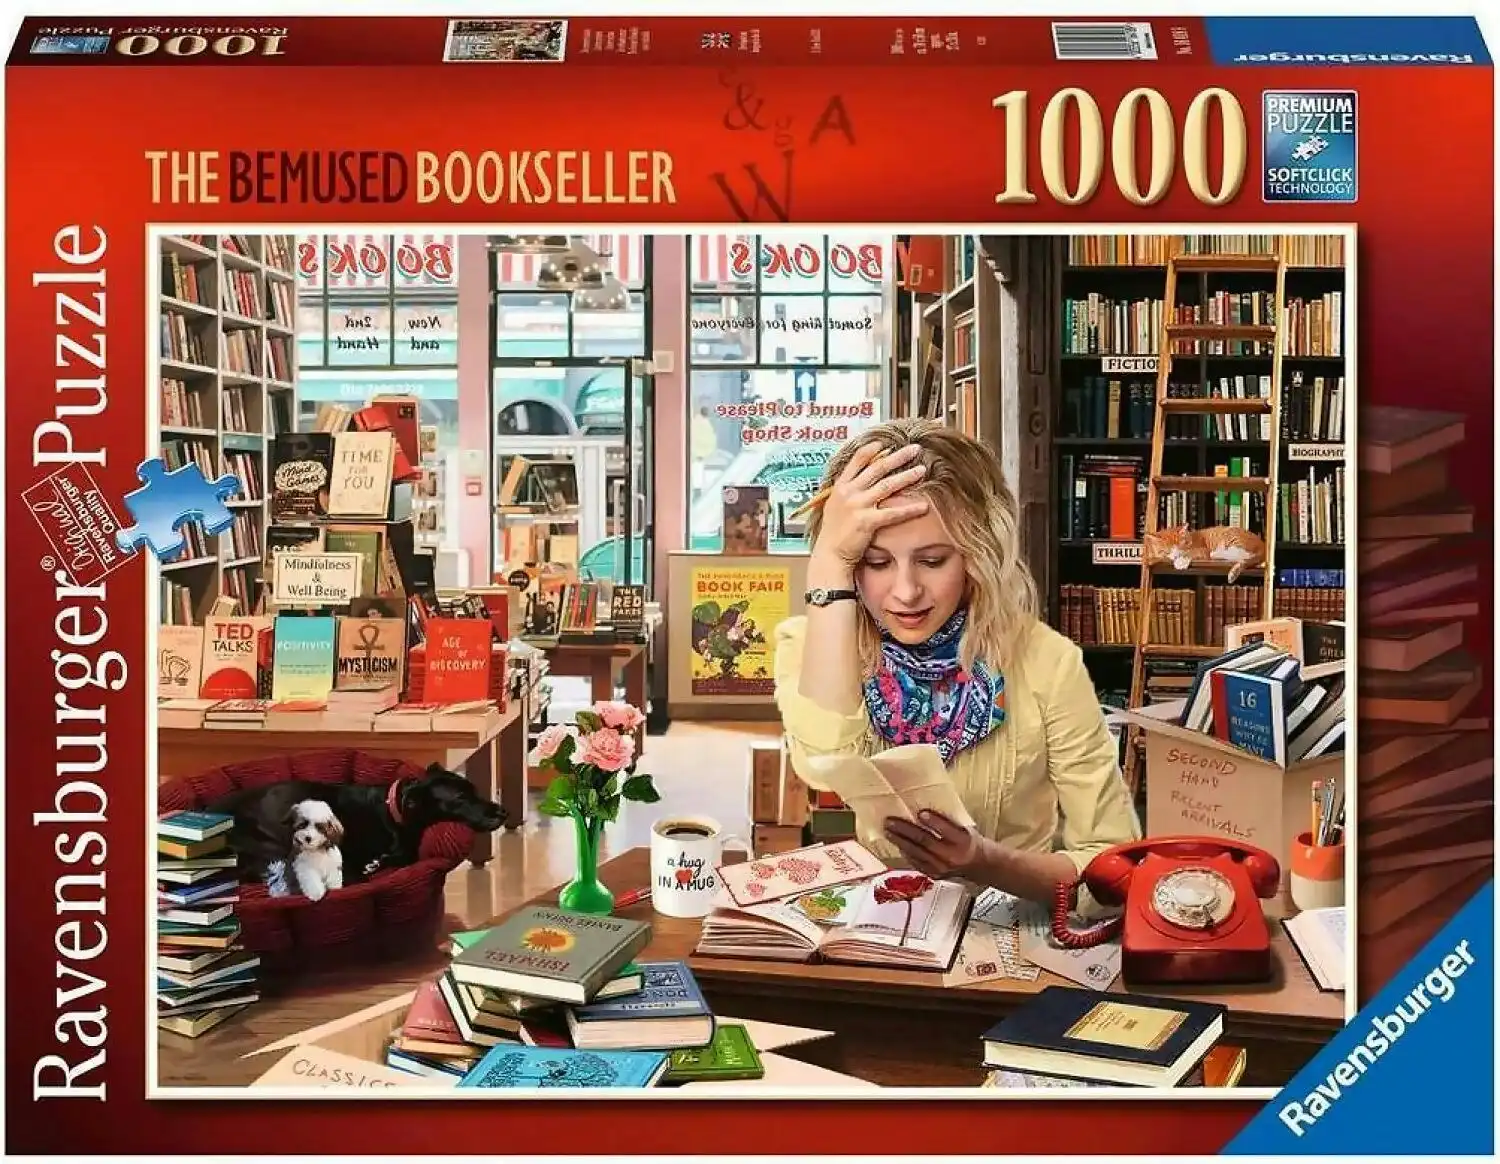 Ravensburger - The Bemused Bookseller Jigsaw Puzzle 1000 Pieces